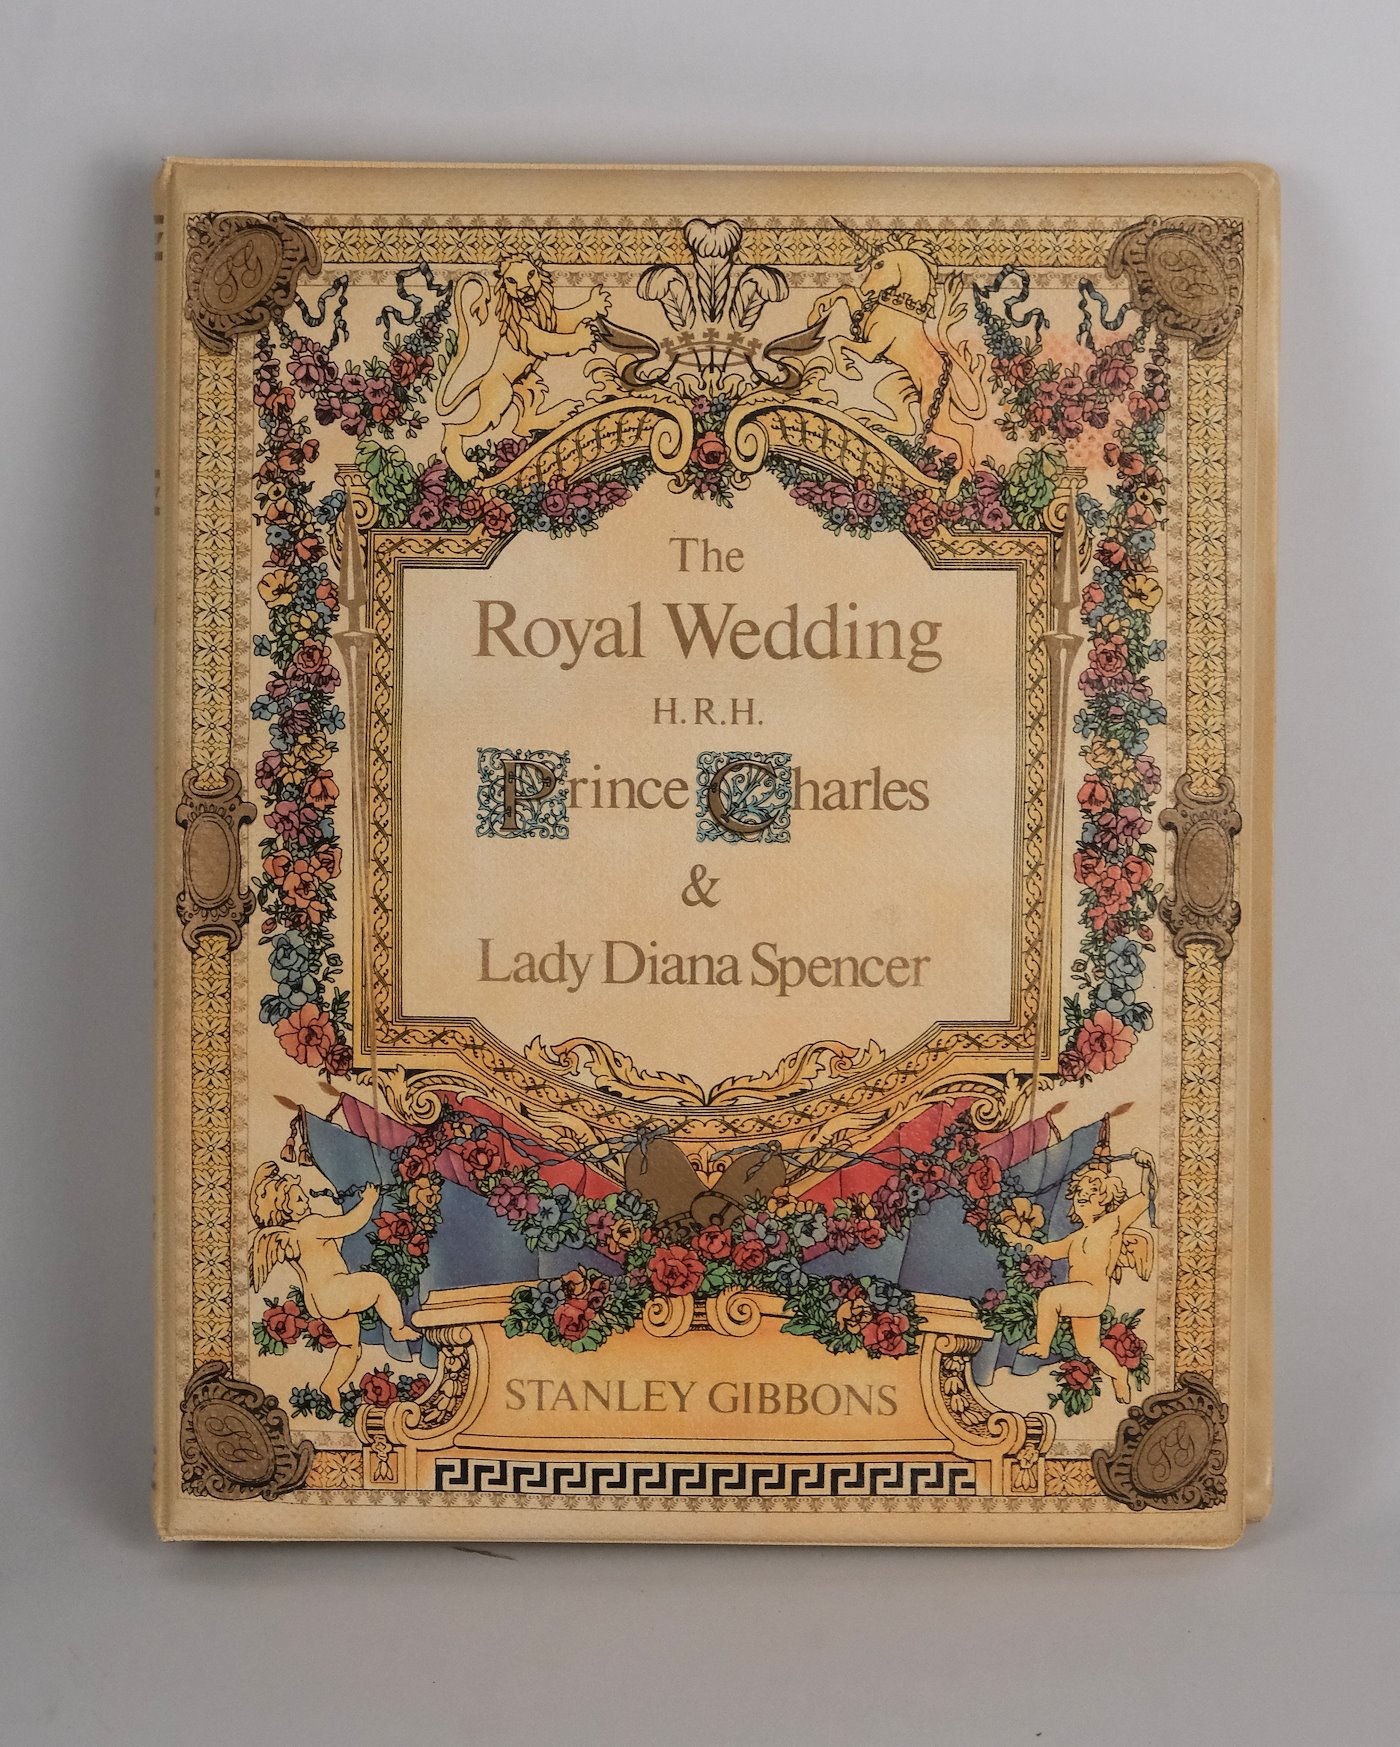 Stanley Gibbons - The Royal Wedding H.R.H. Prince Charles & Lady Diana Spencer